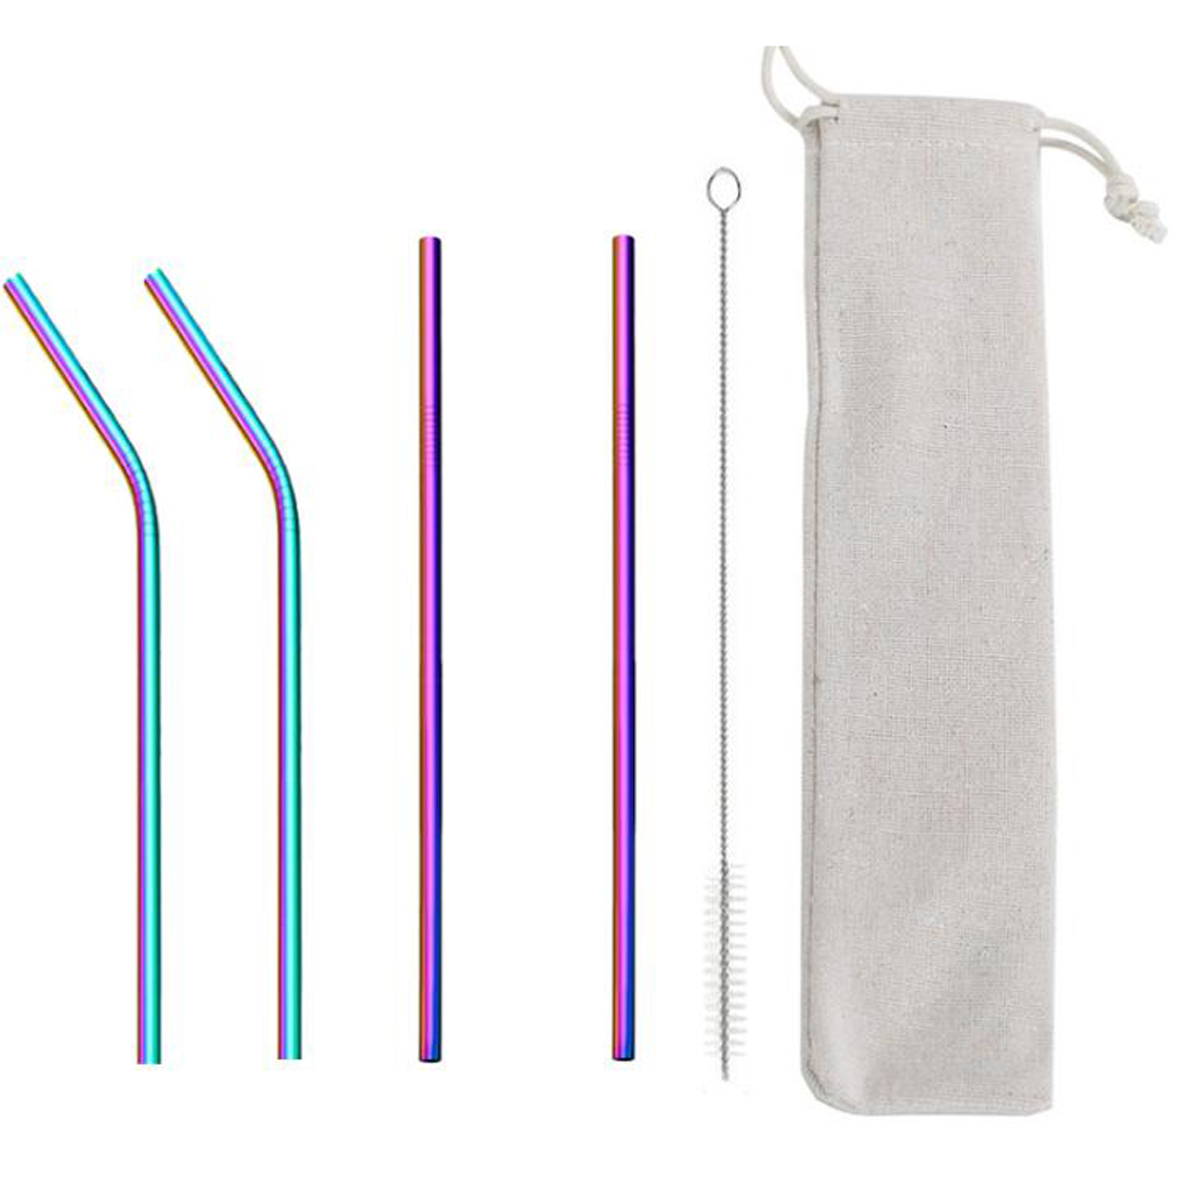 GL-ELY1261 5 in 1 Colored Stainless Steel Straw with Carrying Pouch